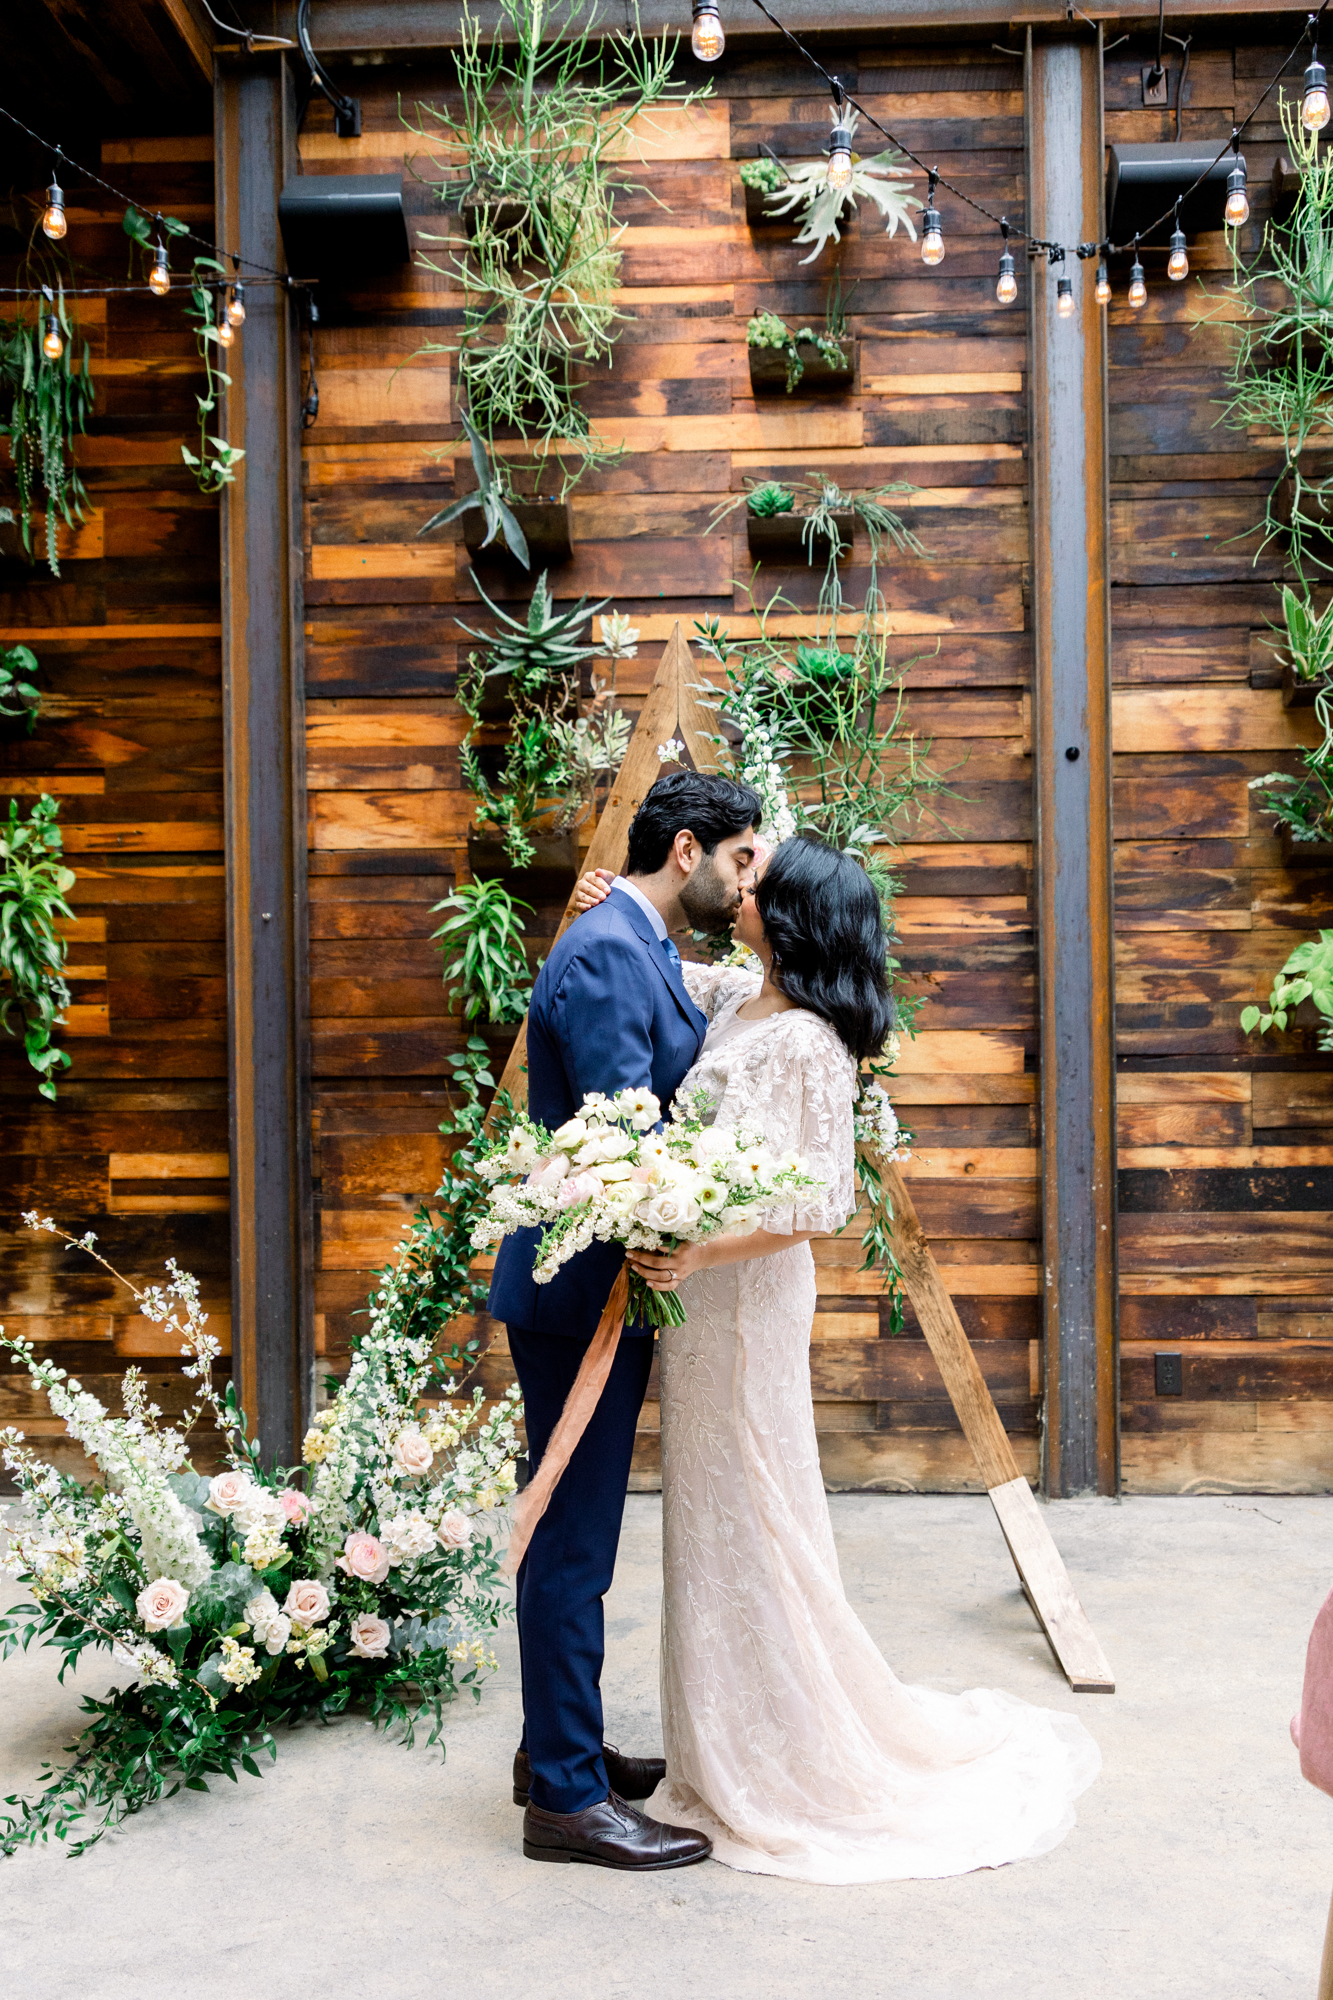 Elegant Brooklyn Winery Wedding Photography Inspiration with Rustic Elements